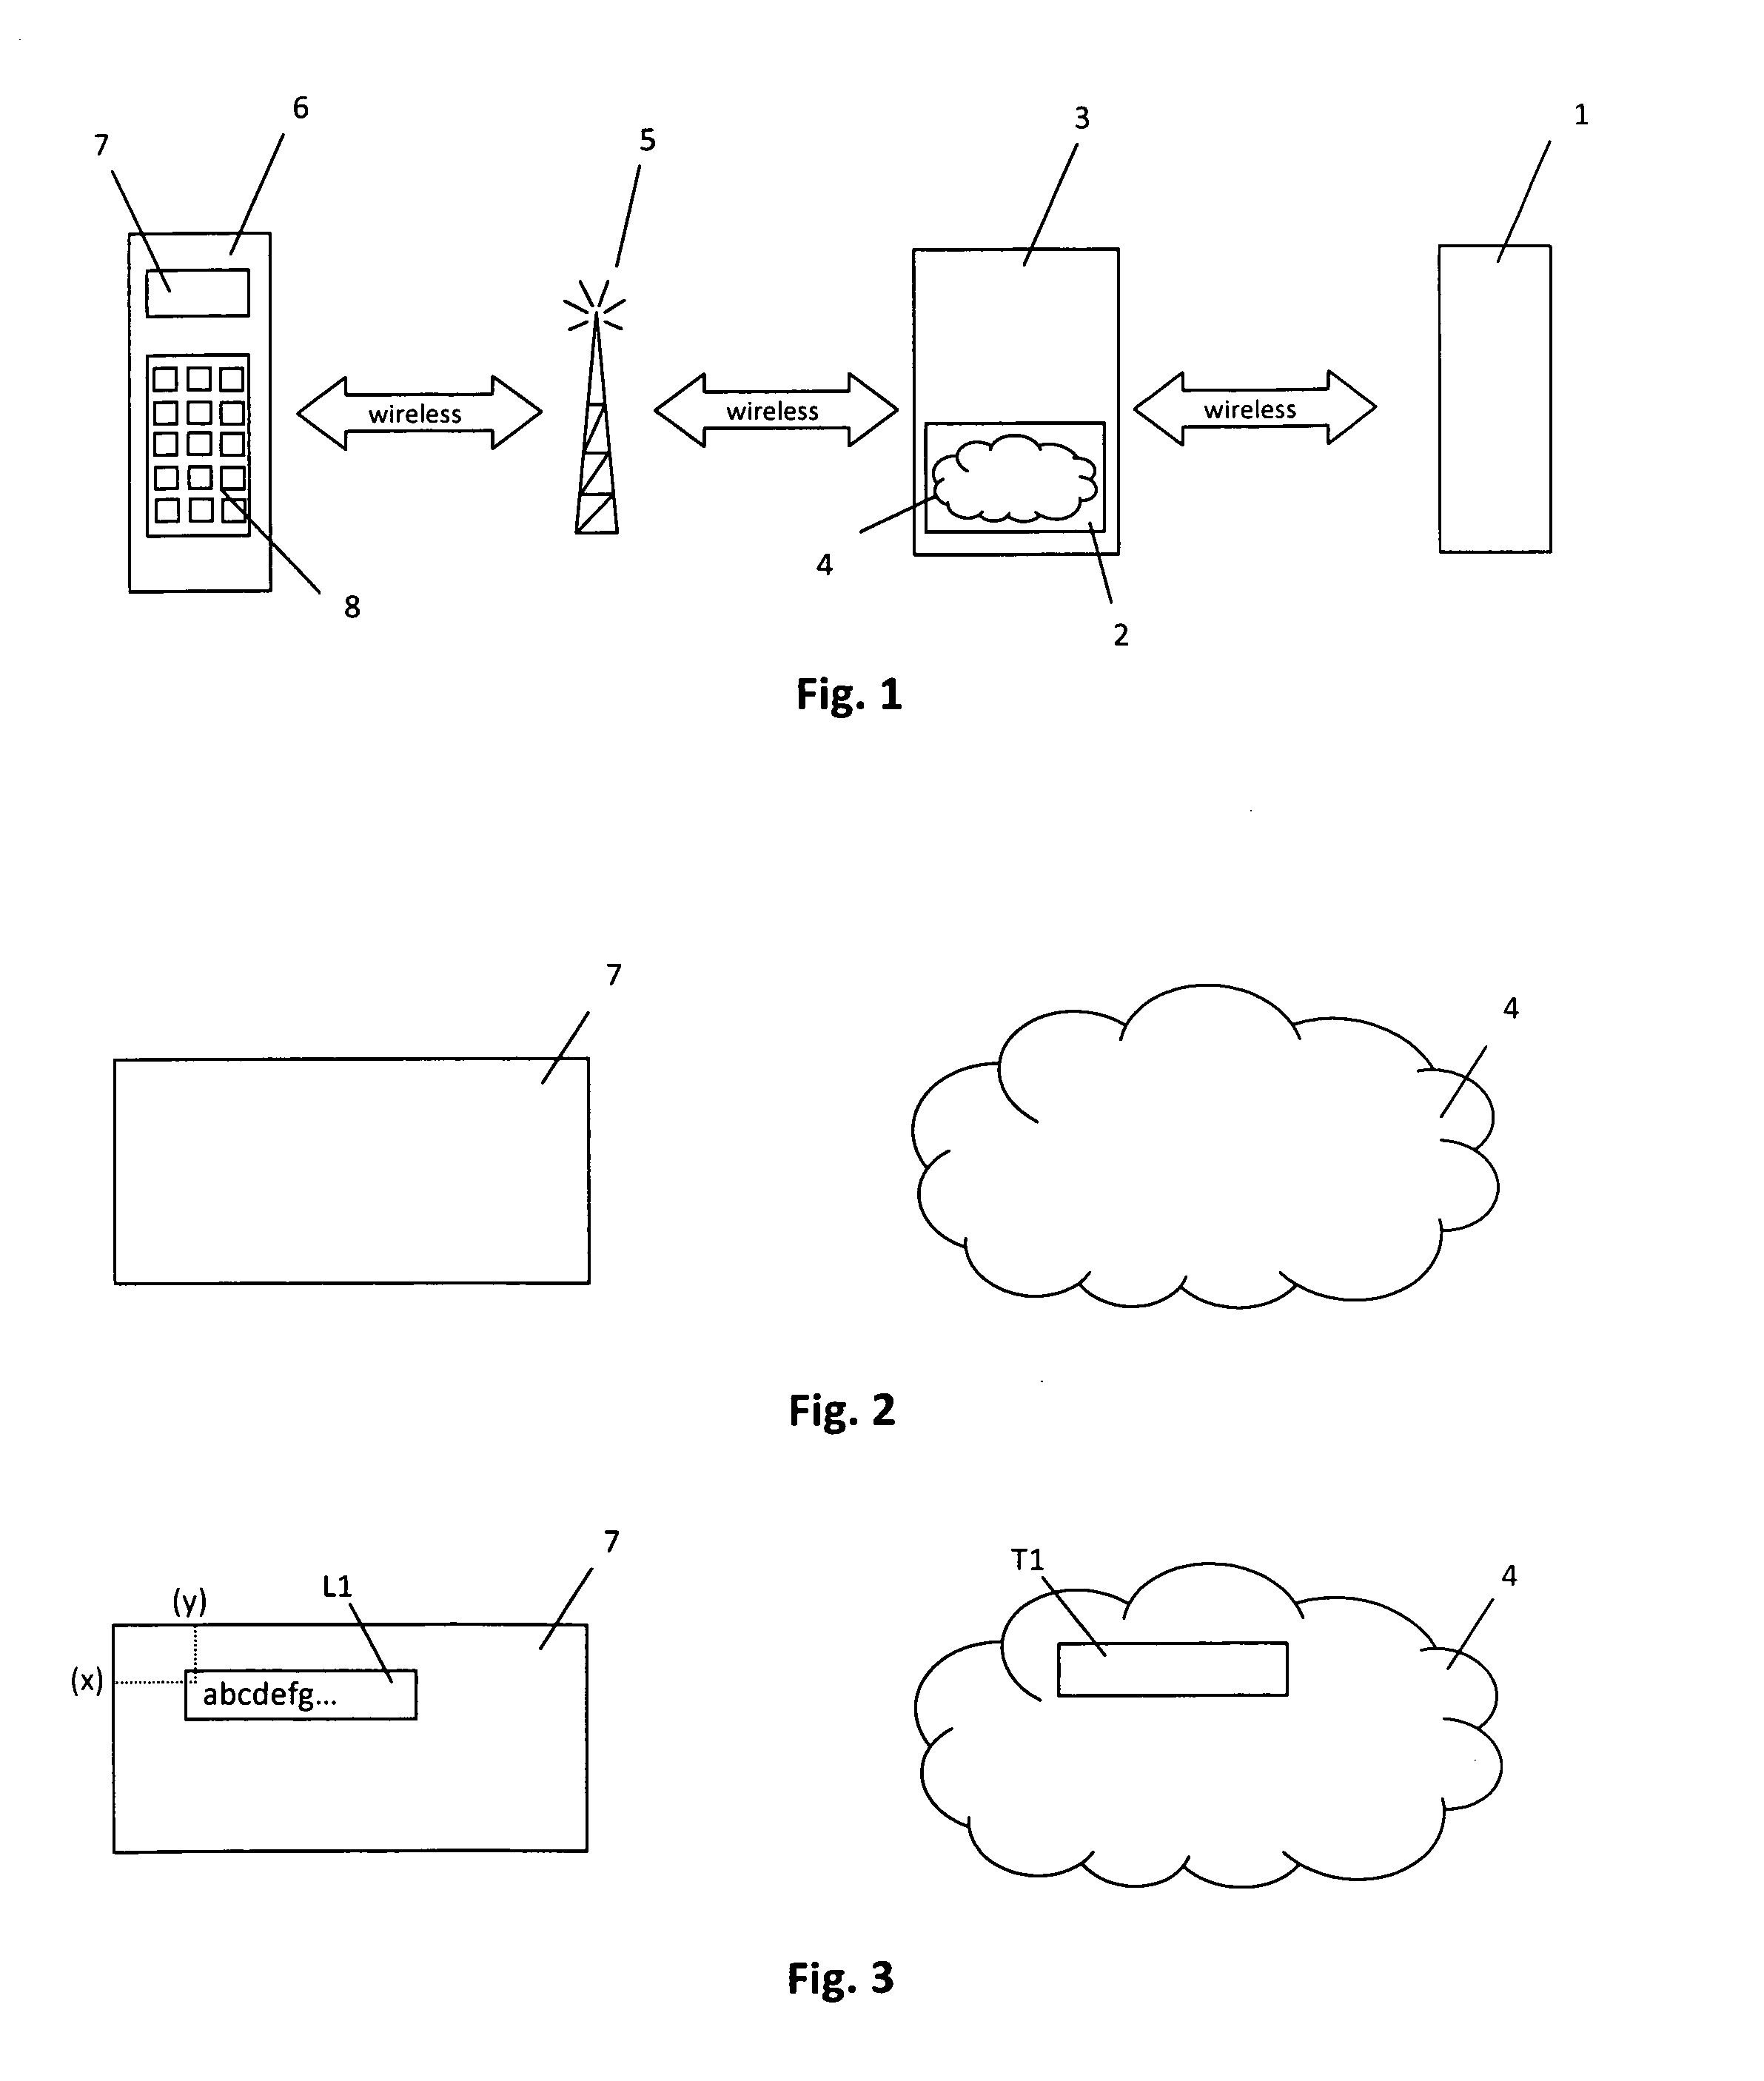 Method for reducing user-perceived lag on text data exchange with a remote server